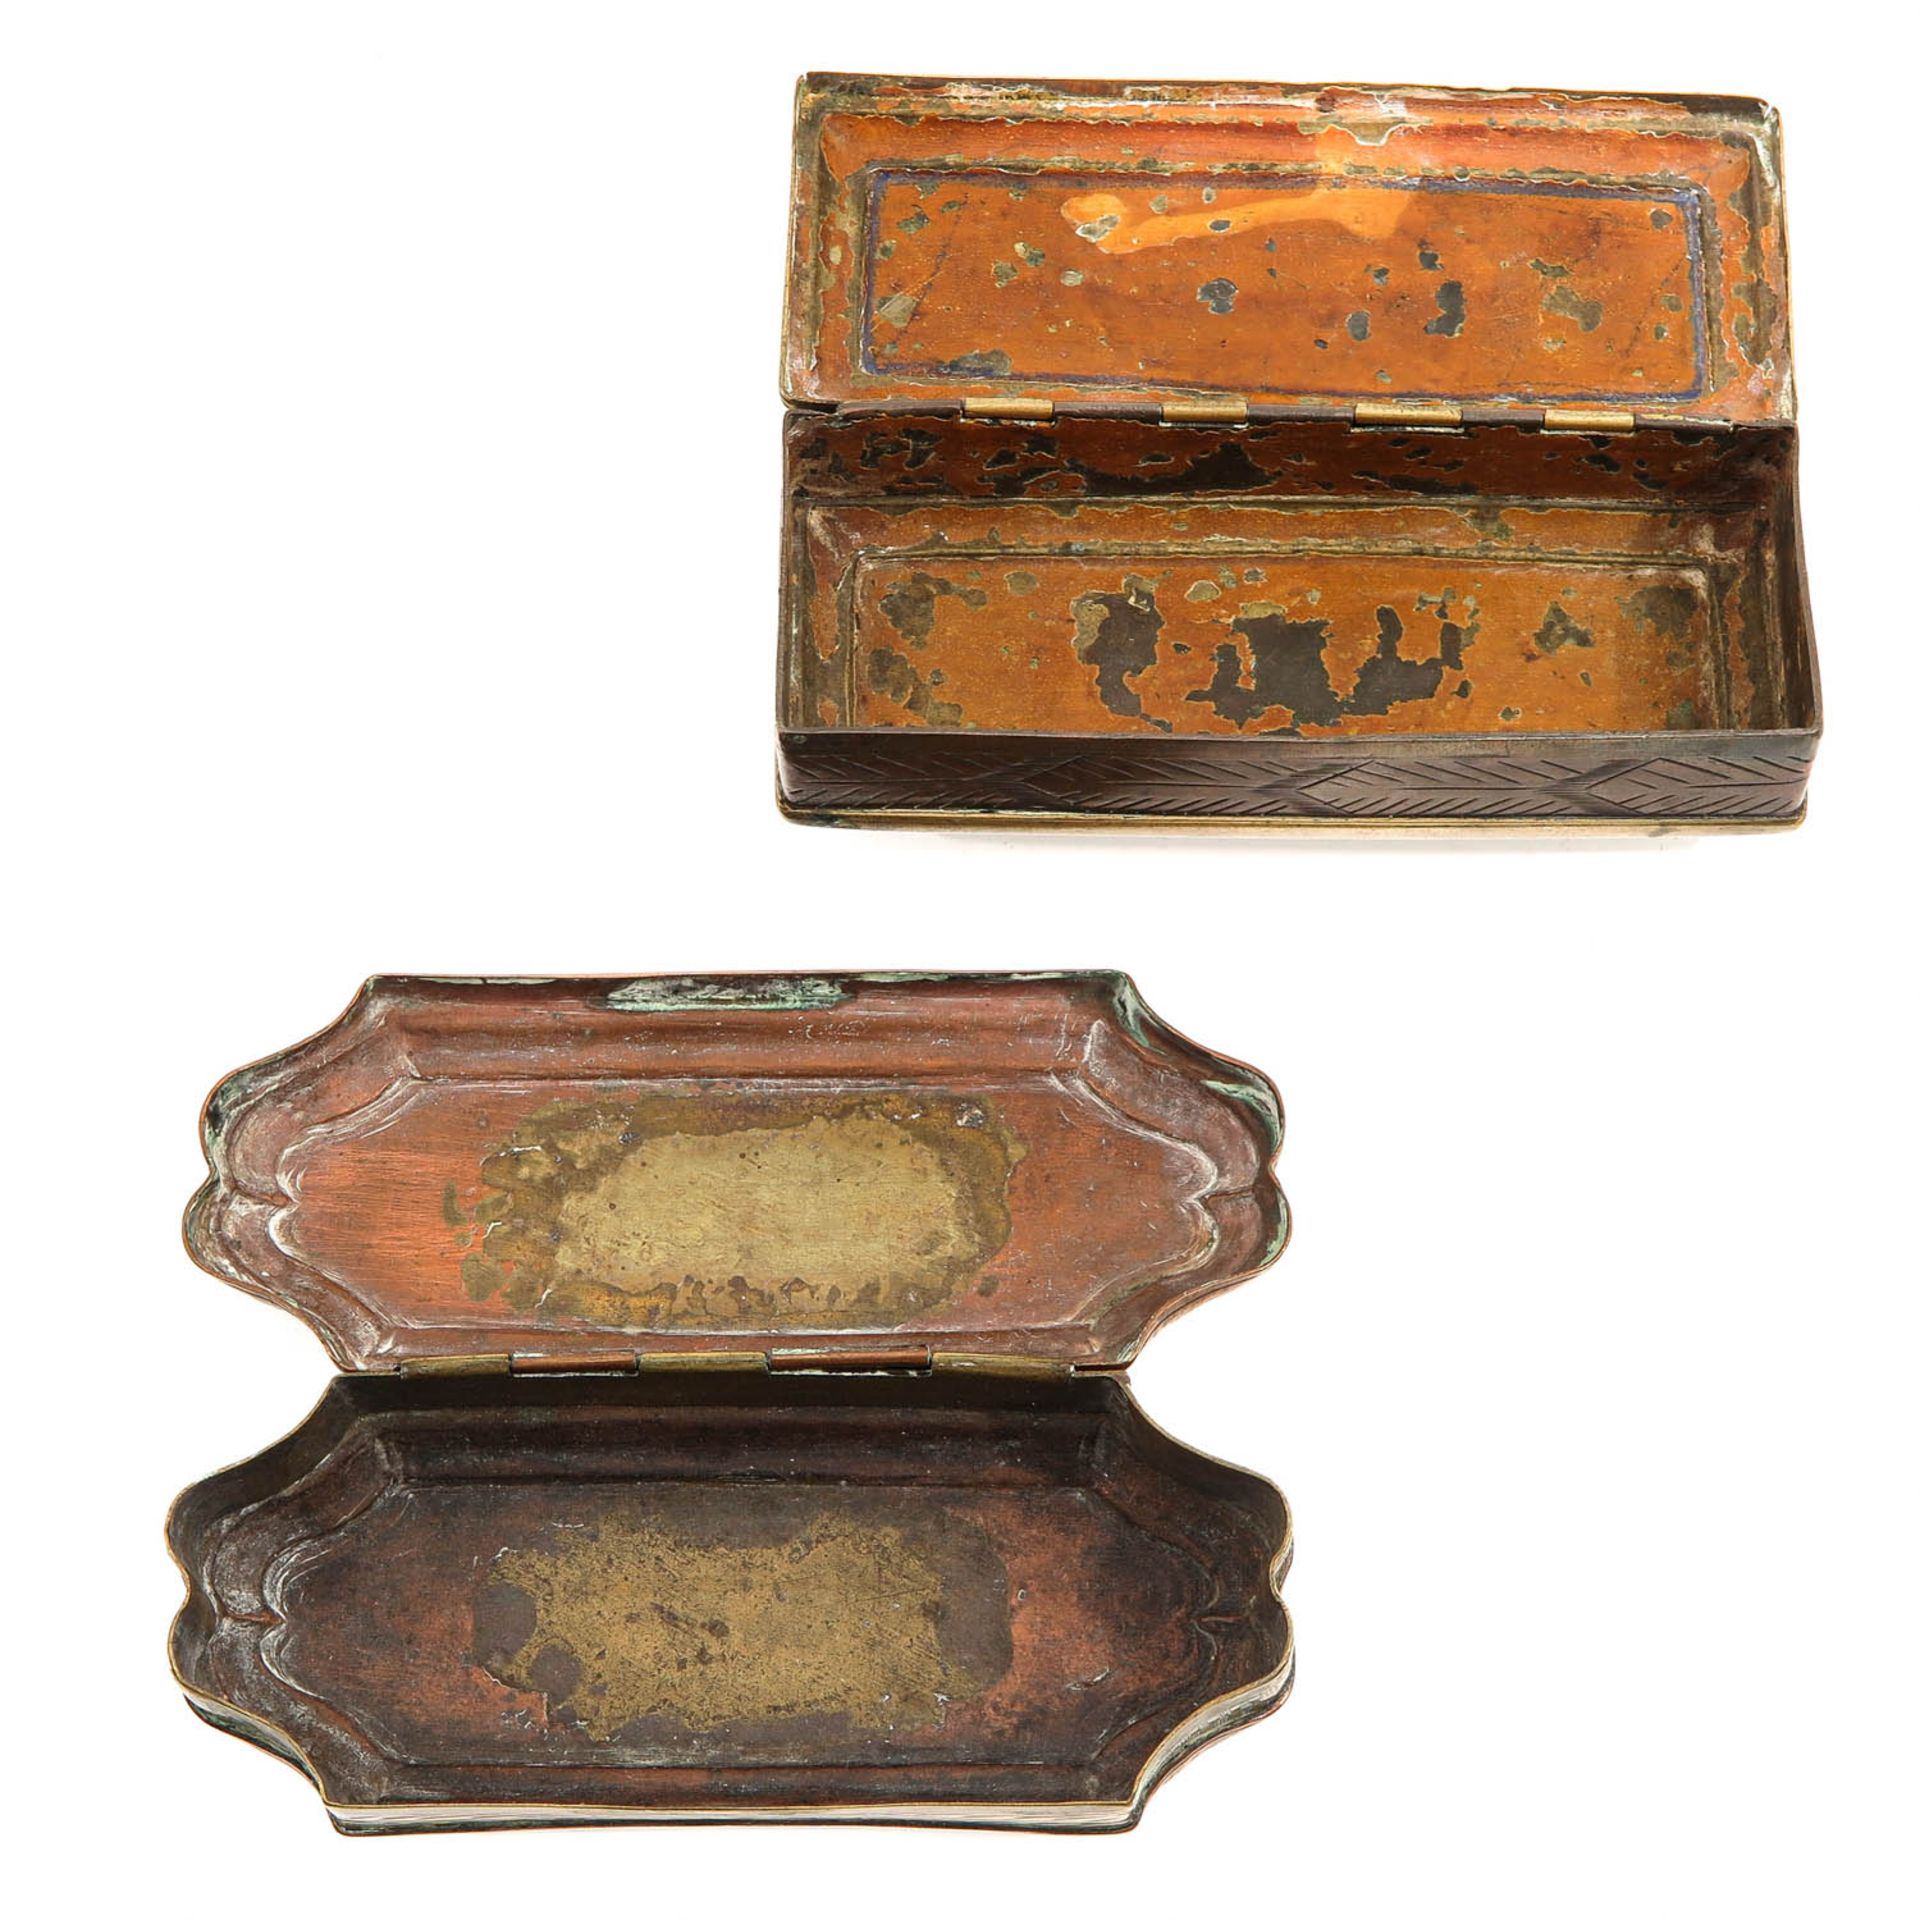 A Lot of 2 18th Century Copper Tobacco Boxes - Image 7 of 9